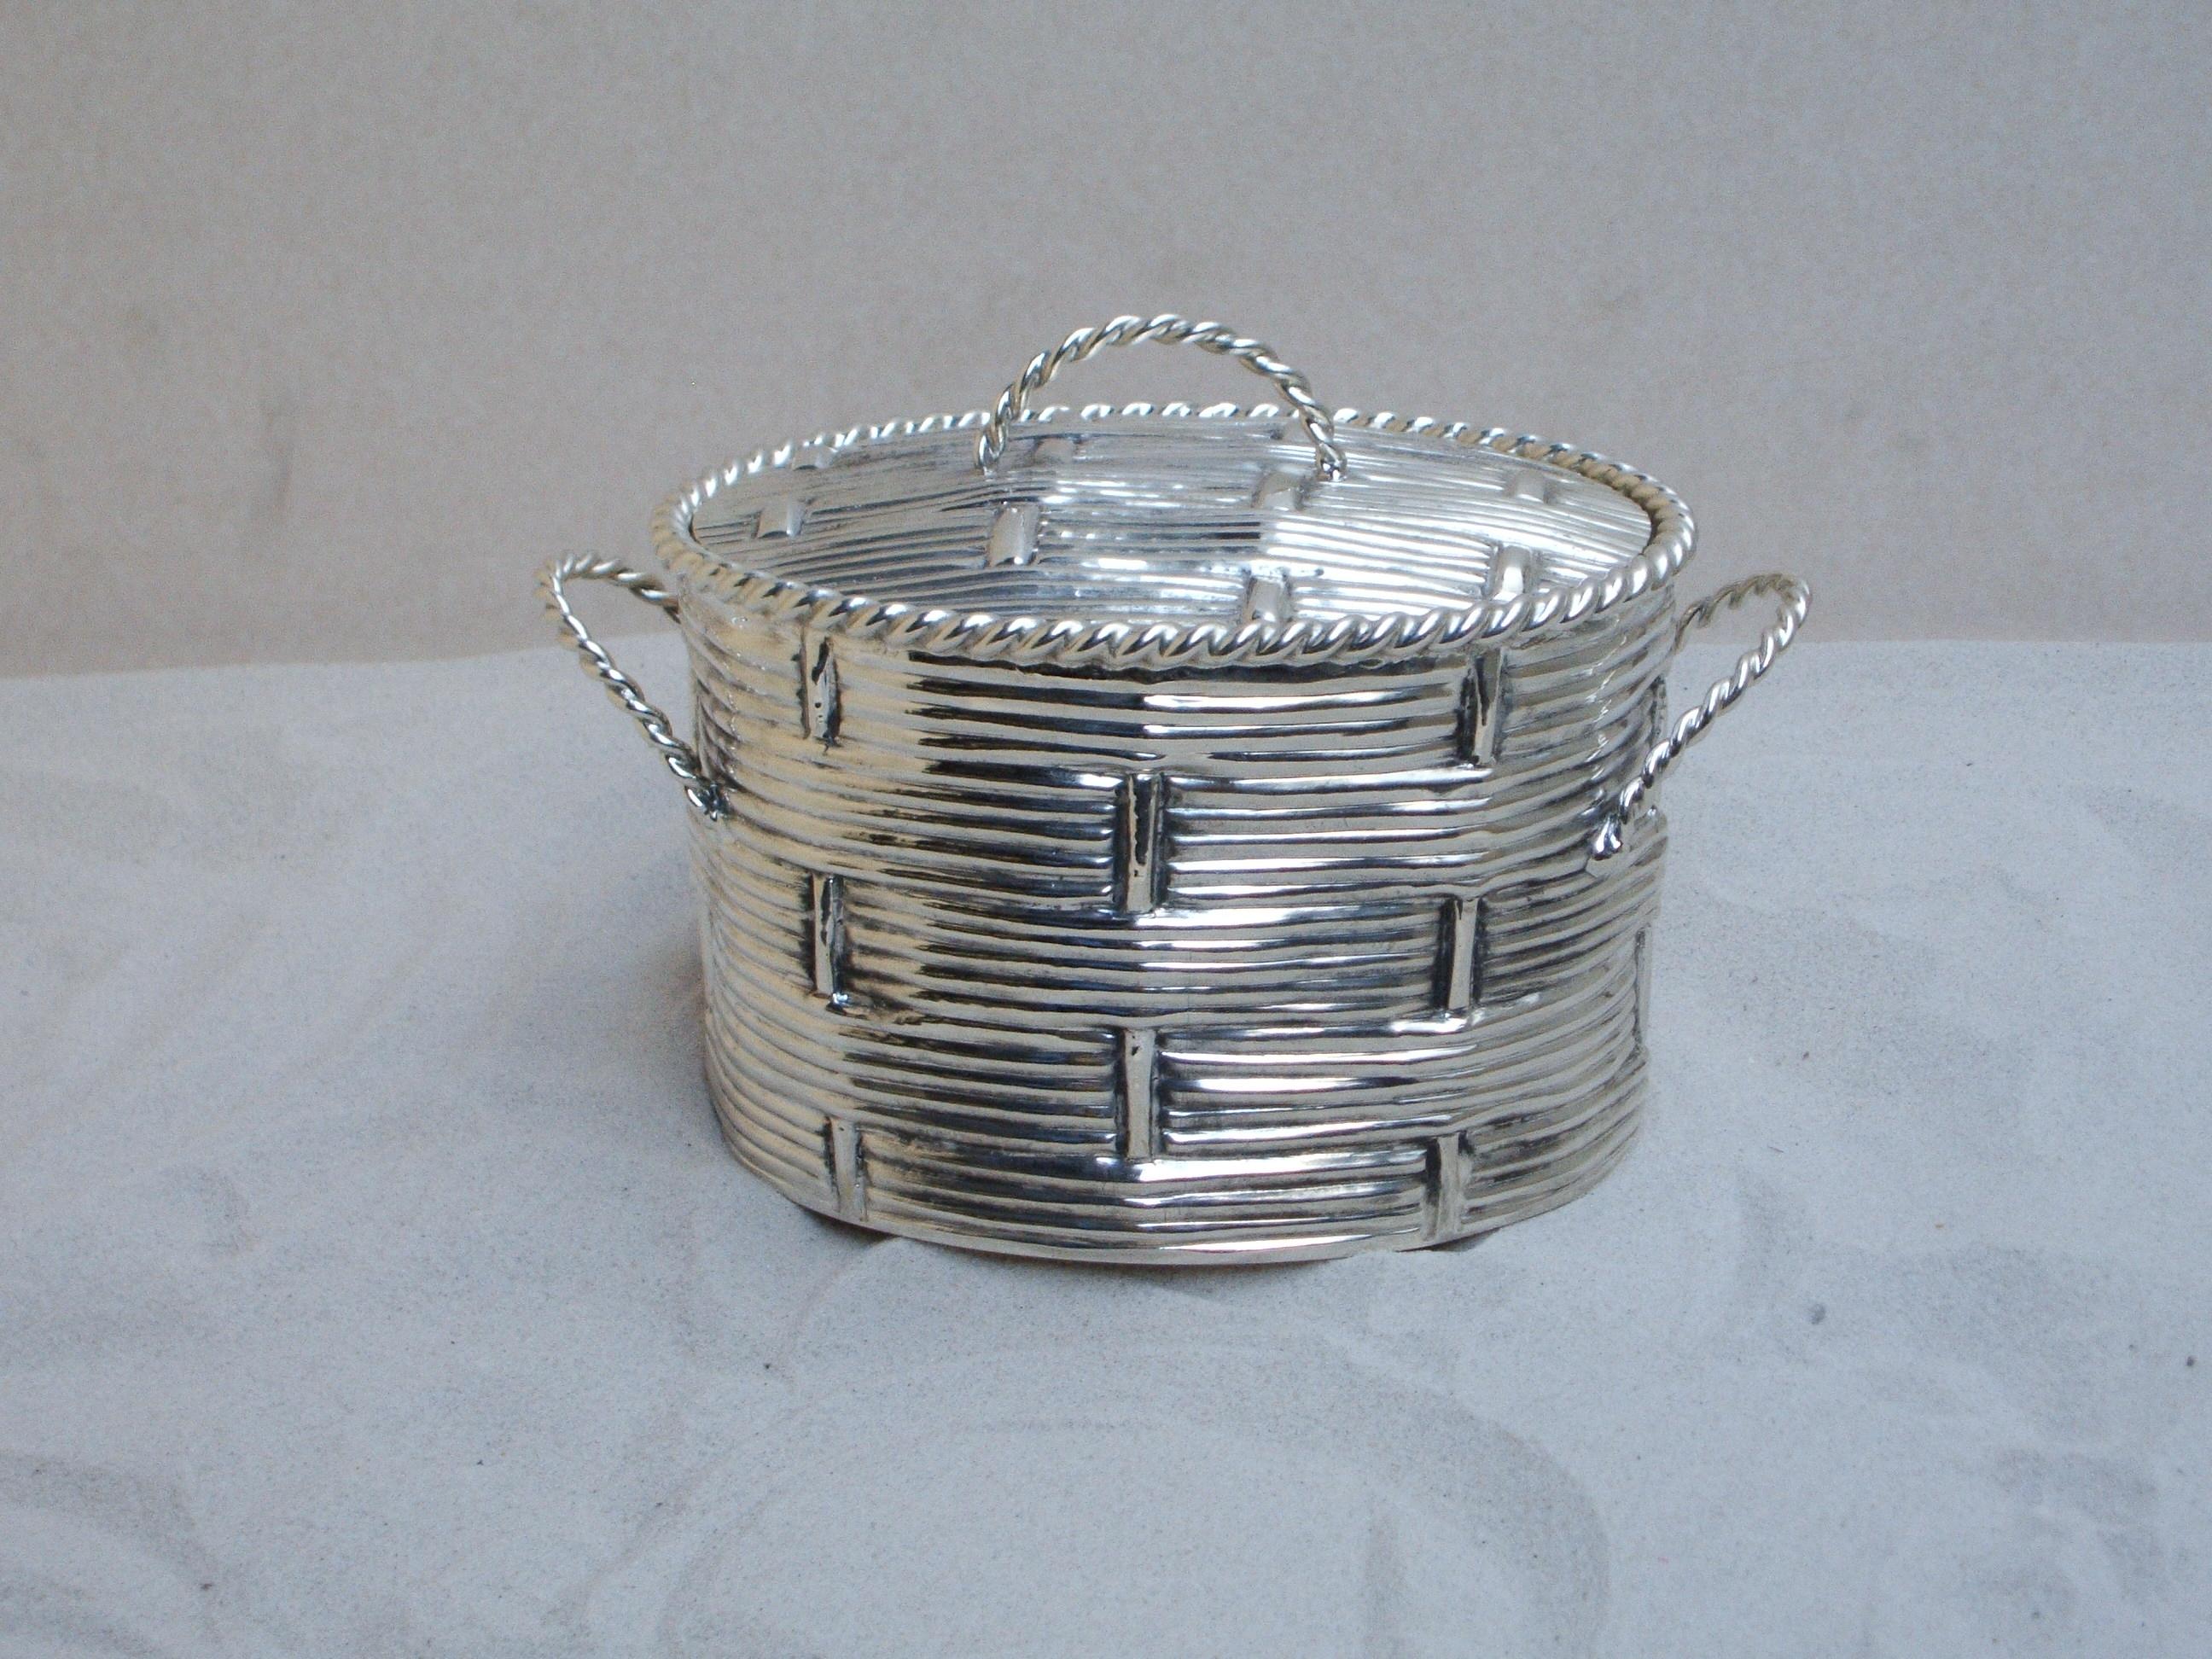 This weaded oval basket with lid was made by Maison Lapparra (silversmith in Paris since 1893). Silver Bronze
Created circa 1980s. This basket can also come as a pair. 
Measures: Height 13 cm 
Width 16 cm
Lenght 23 cm
Made in France.